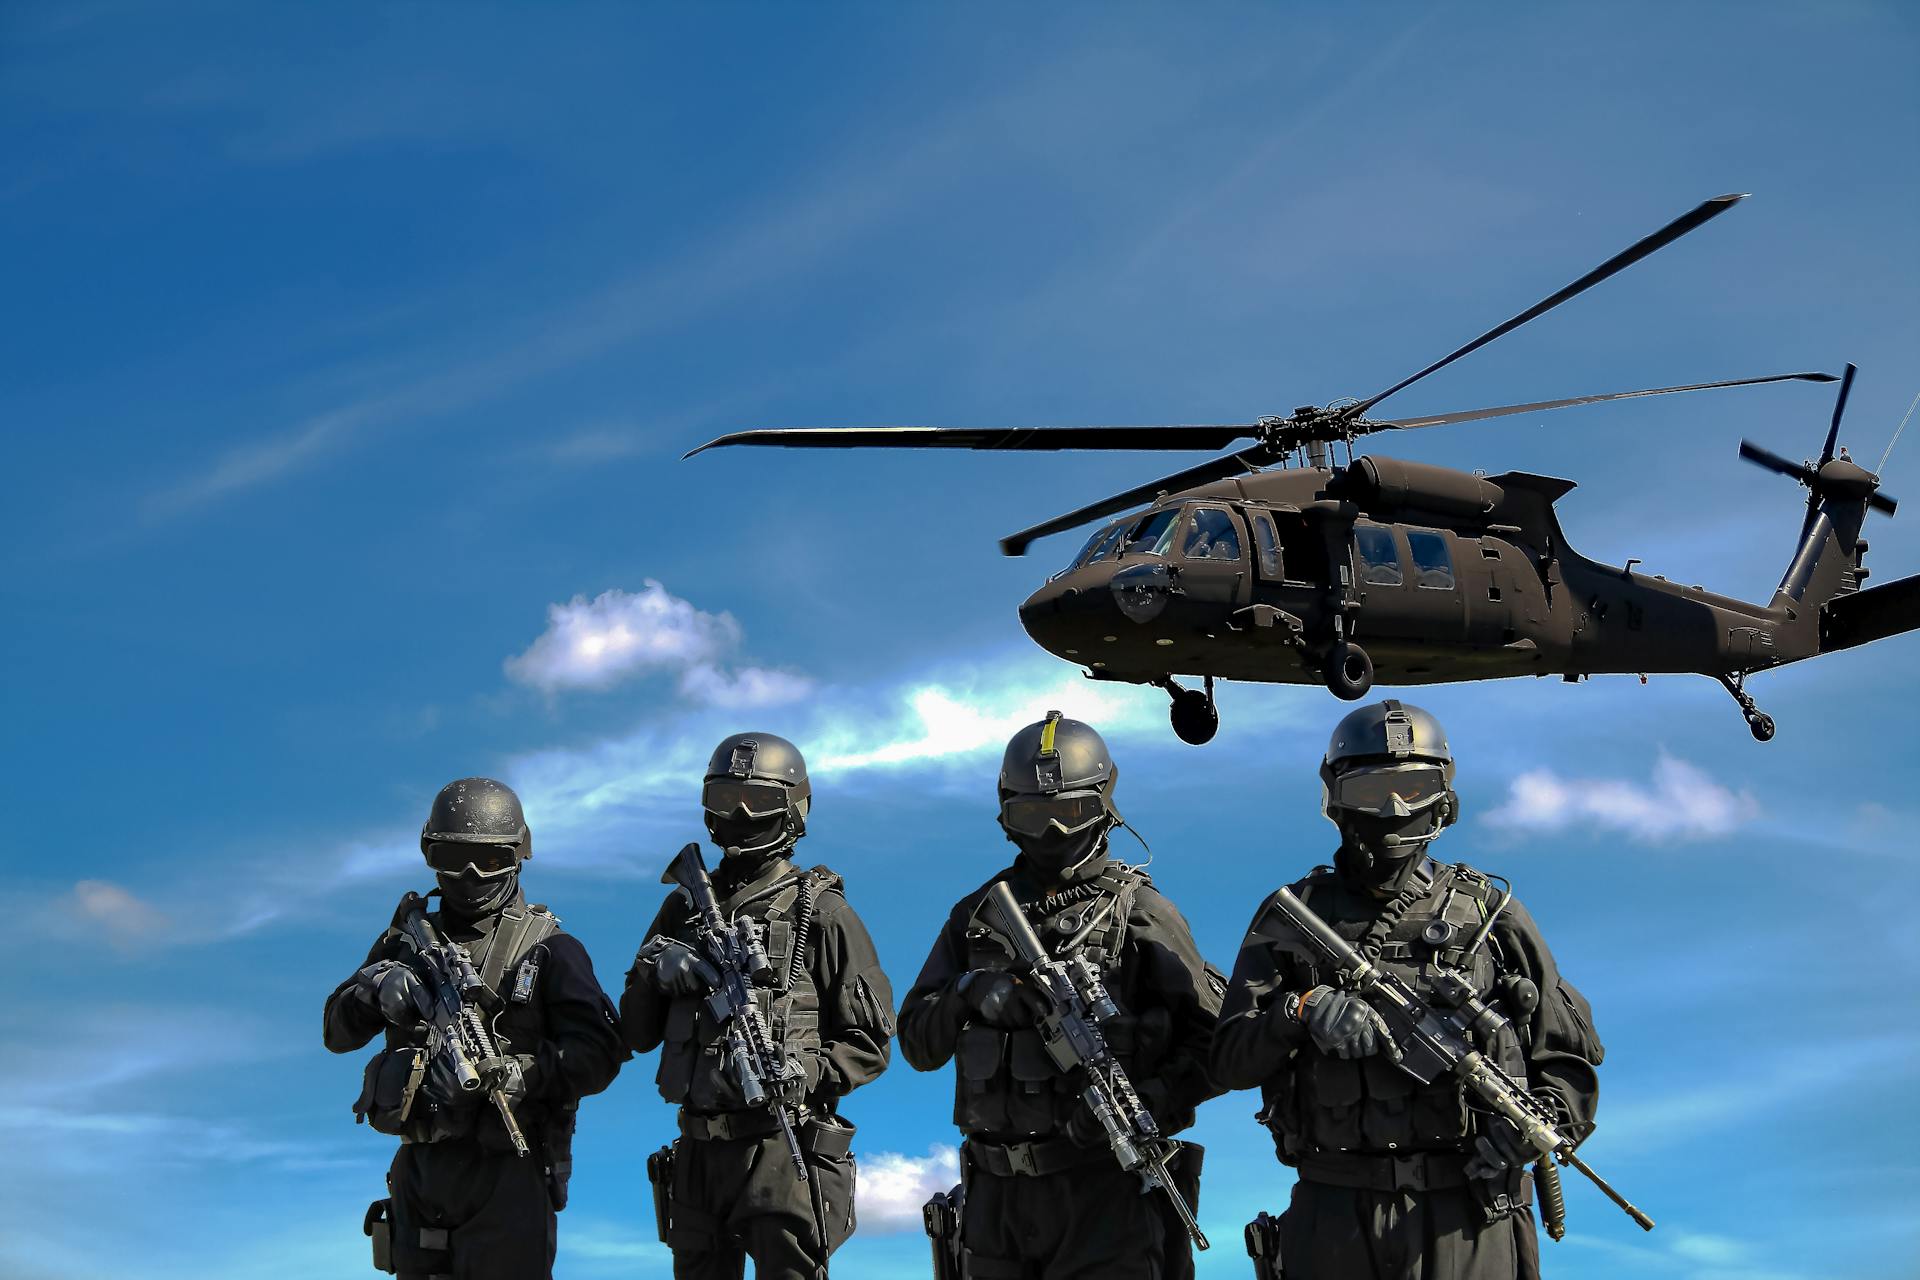 a group of people in uniform holding guns and a helicopter